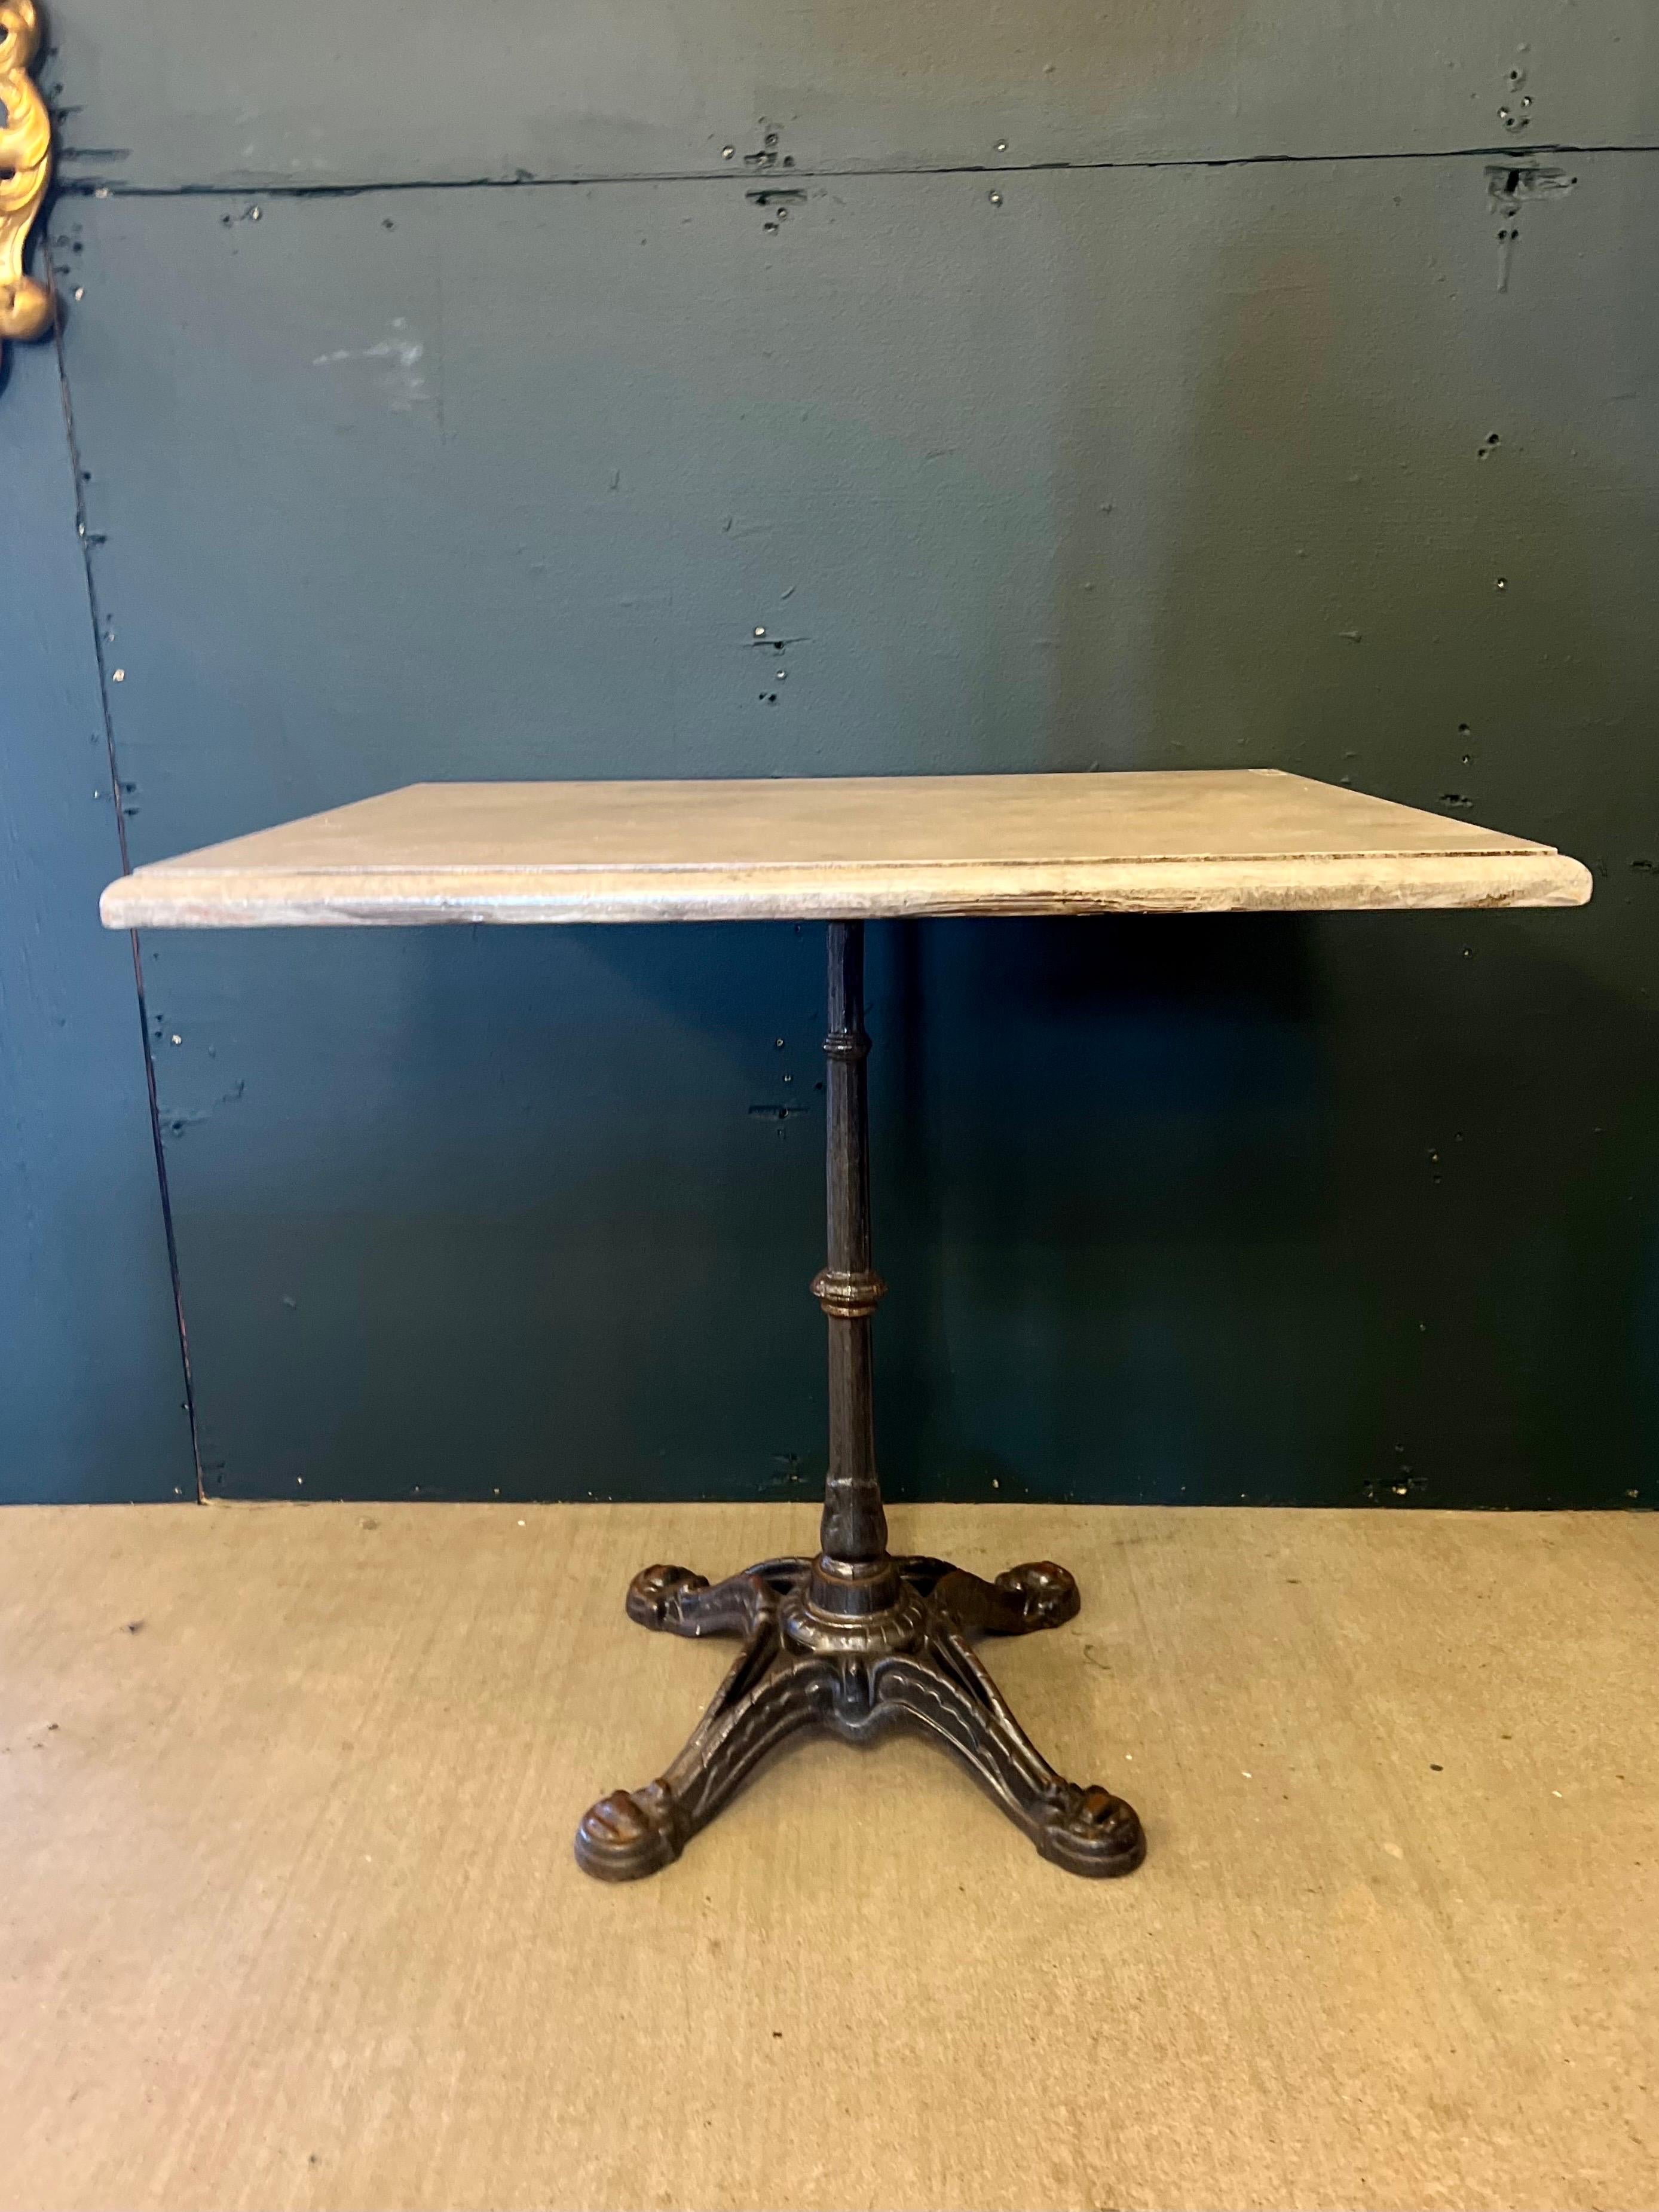 Vintage French iron bistro table with a solidly built wood top with beveled edge and painted in a faux marble finish. Wood top is removable for transport and these French bistro tables can be used both indoor & outdoor. Multiple tables available